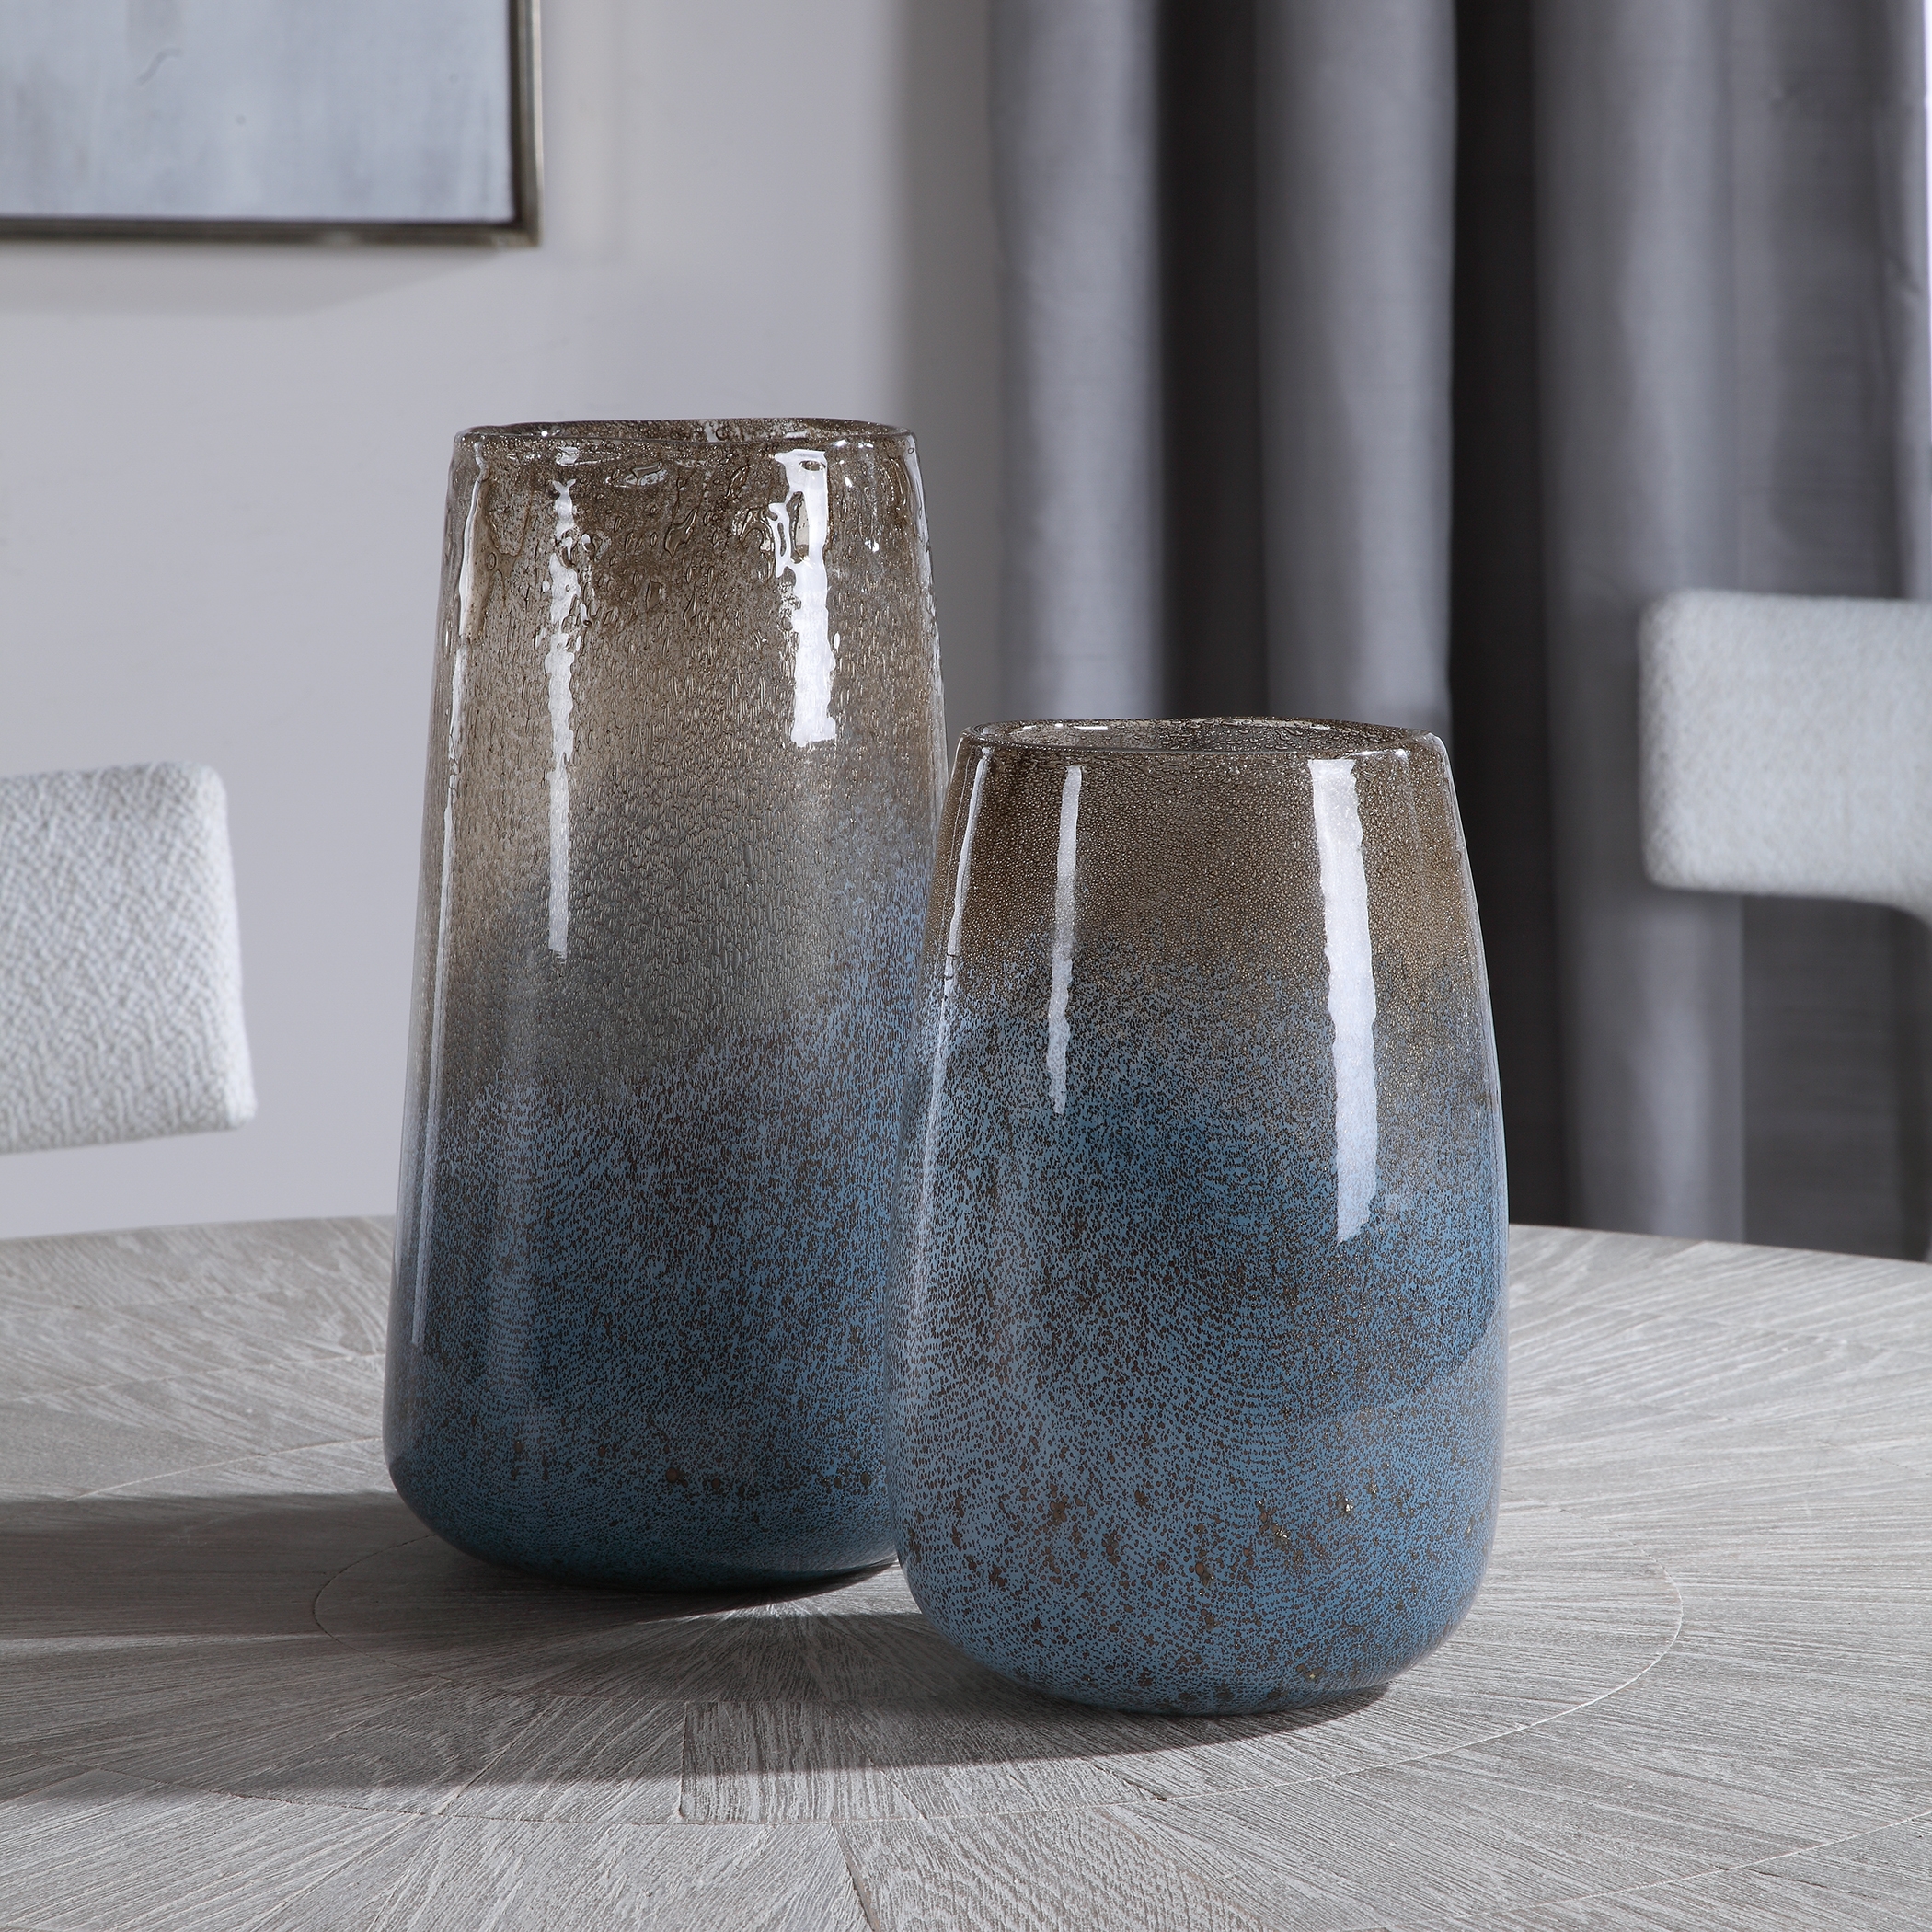 Ione Seeded Glass Vases, S/2 - Image 1